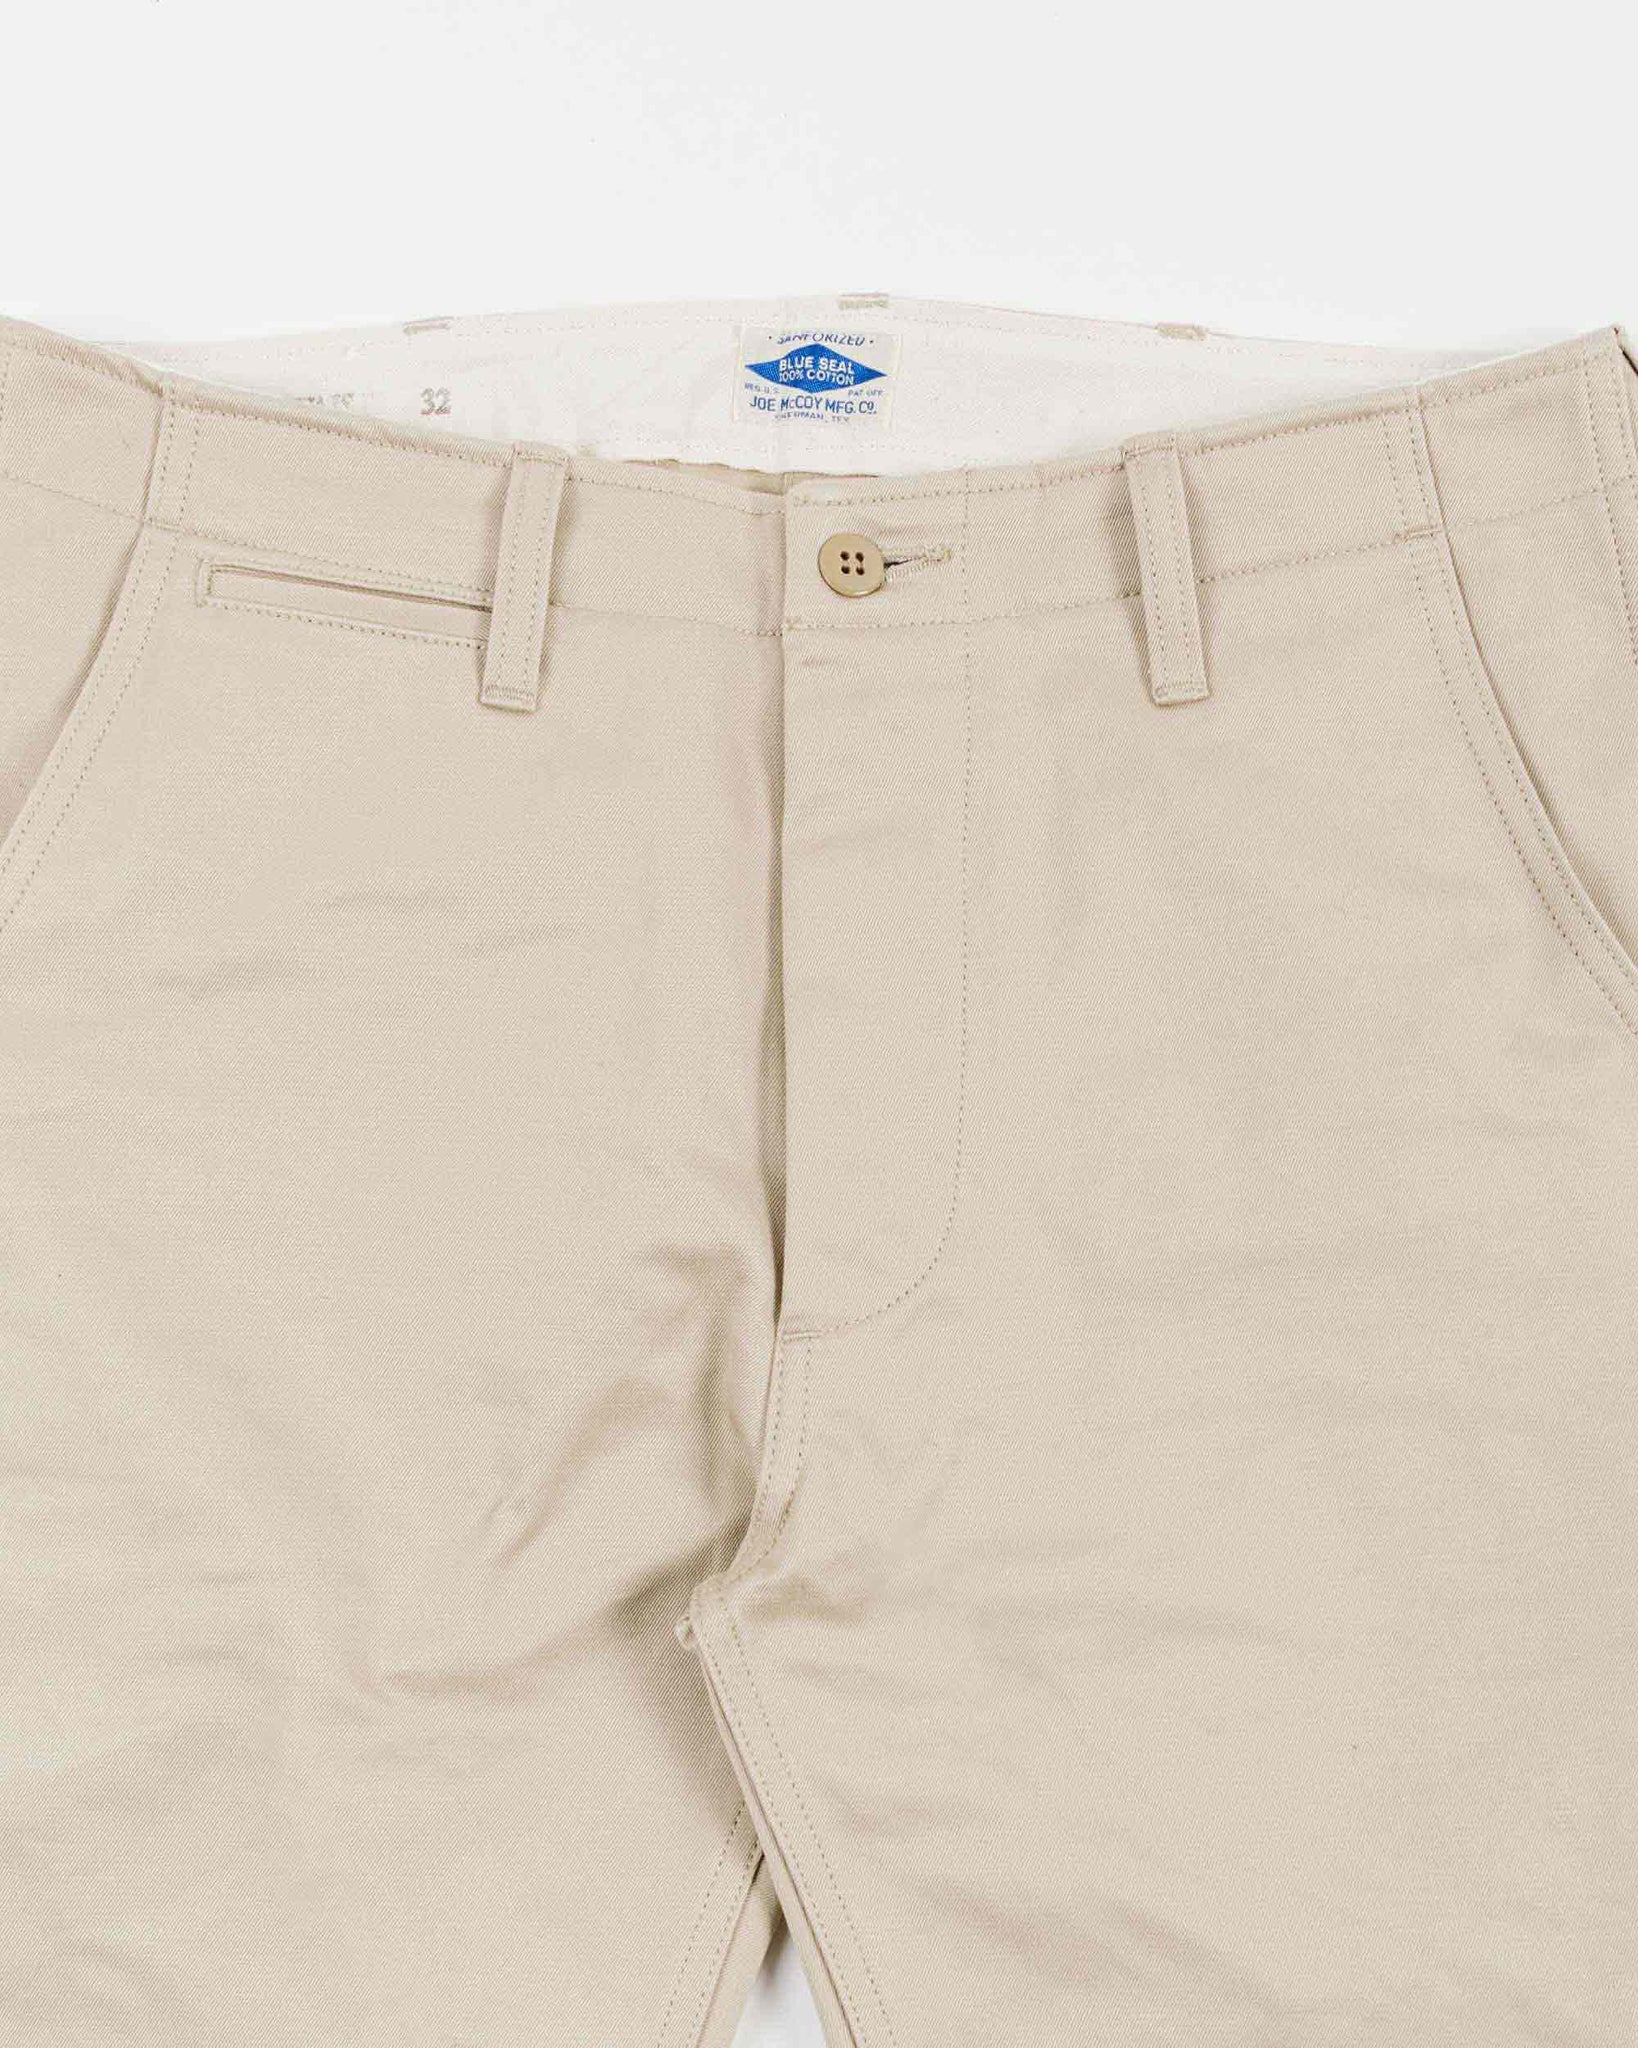 The Real McCoy's MP19010 Blue Seal Chino Trousers Beige Details